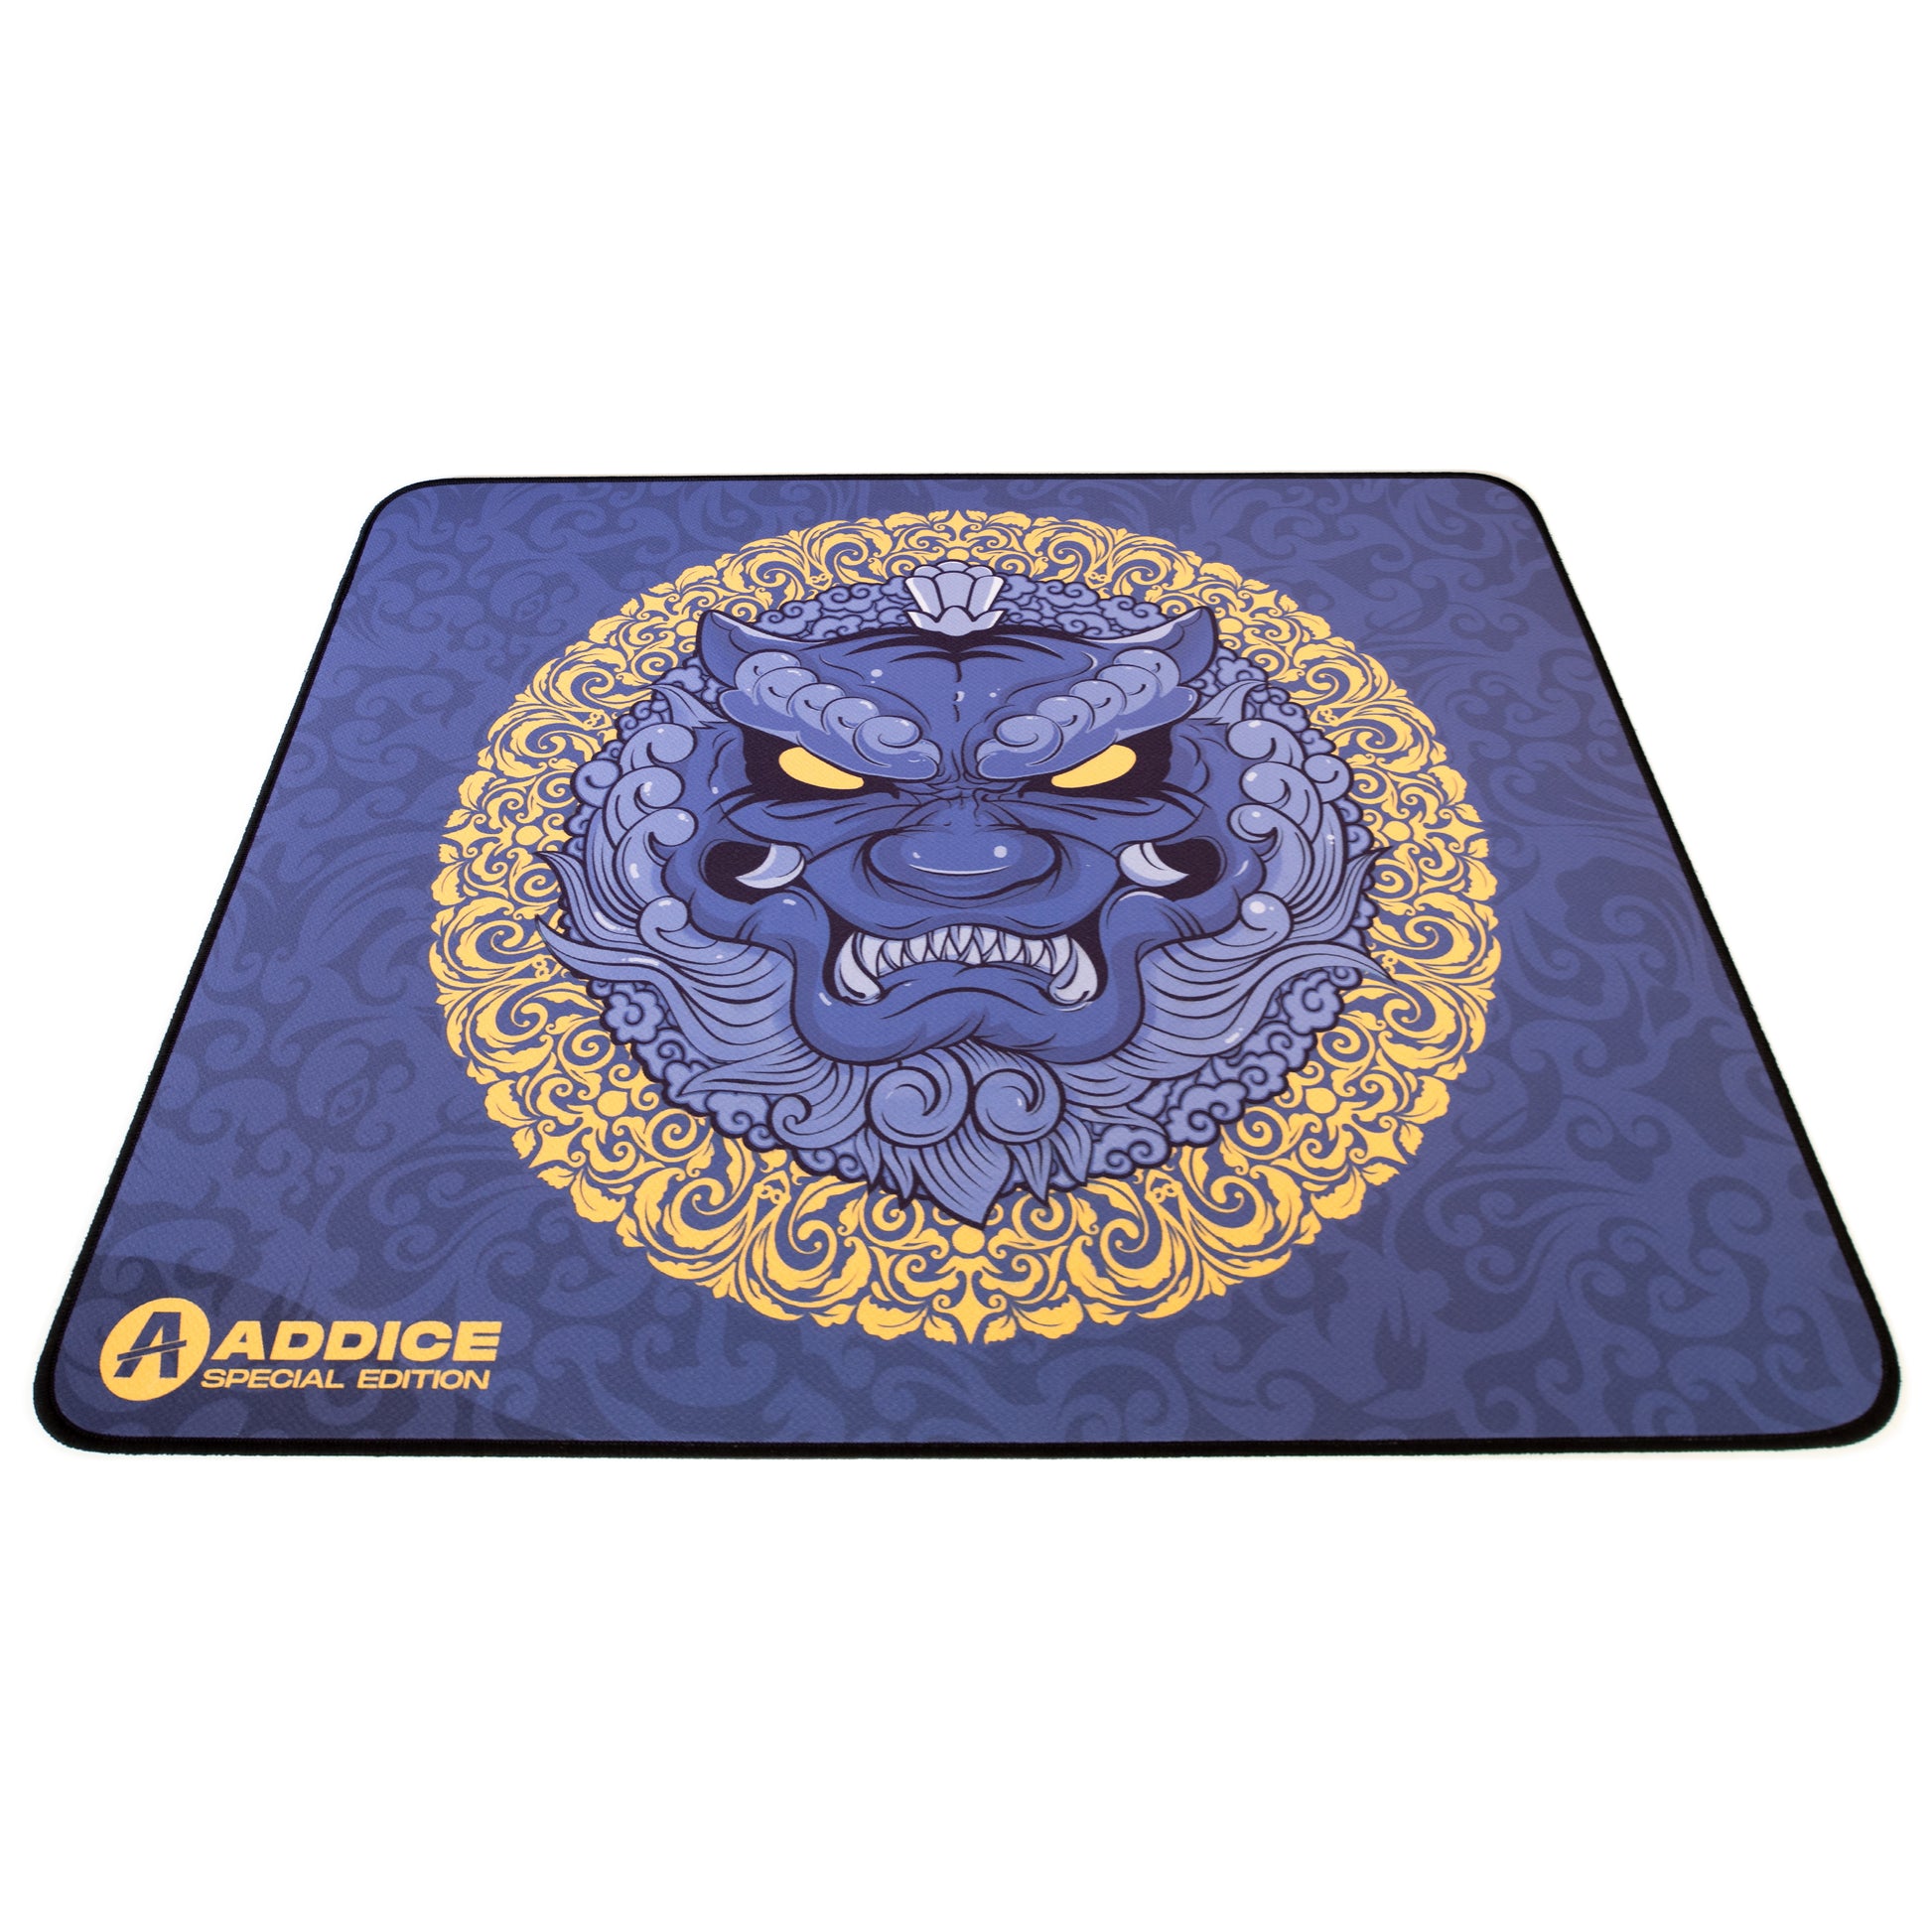 LongTeng Addice Special Edition Large Gaming Mouse Pad